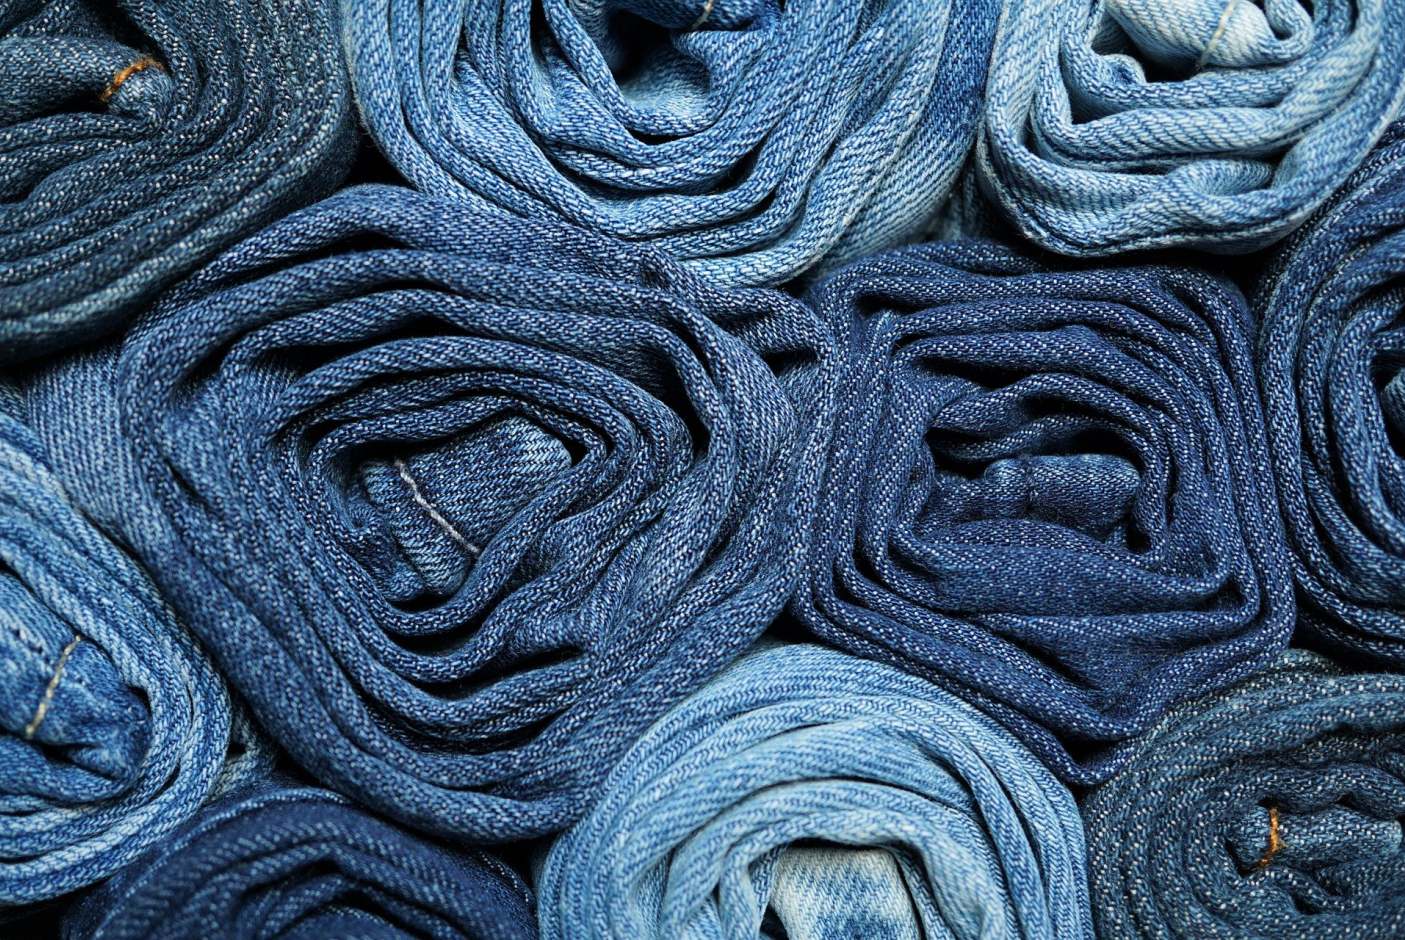 Where To Buy Sustainable Jeans | Sustainable Denim Brands